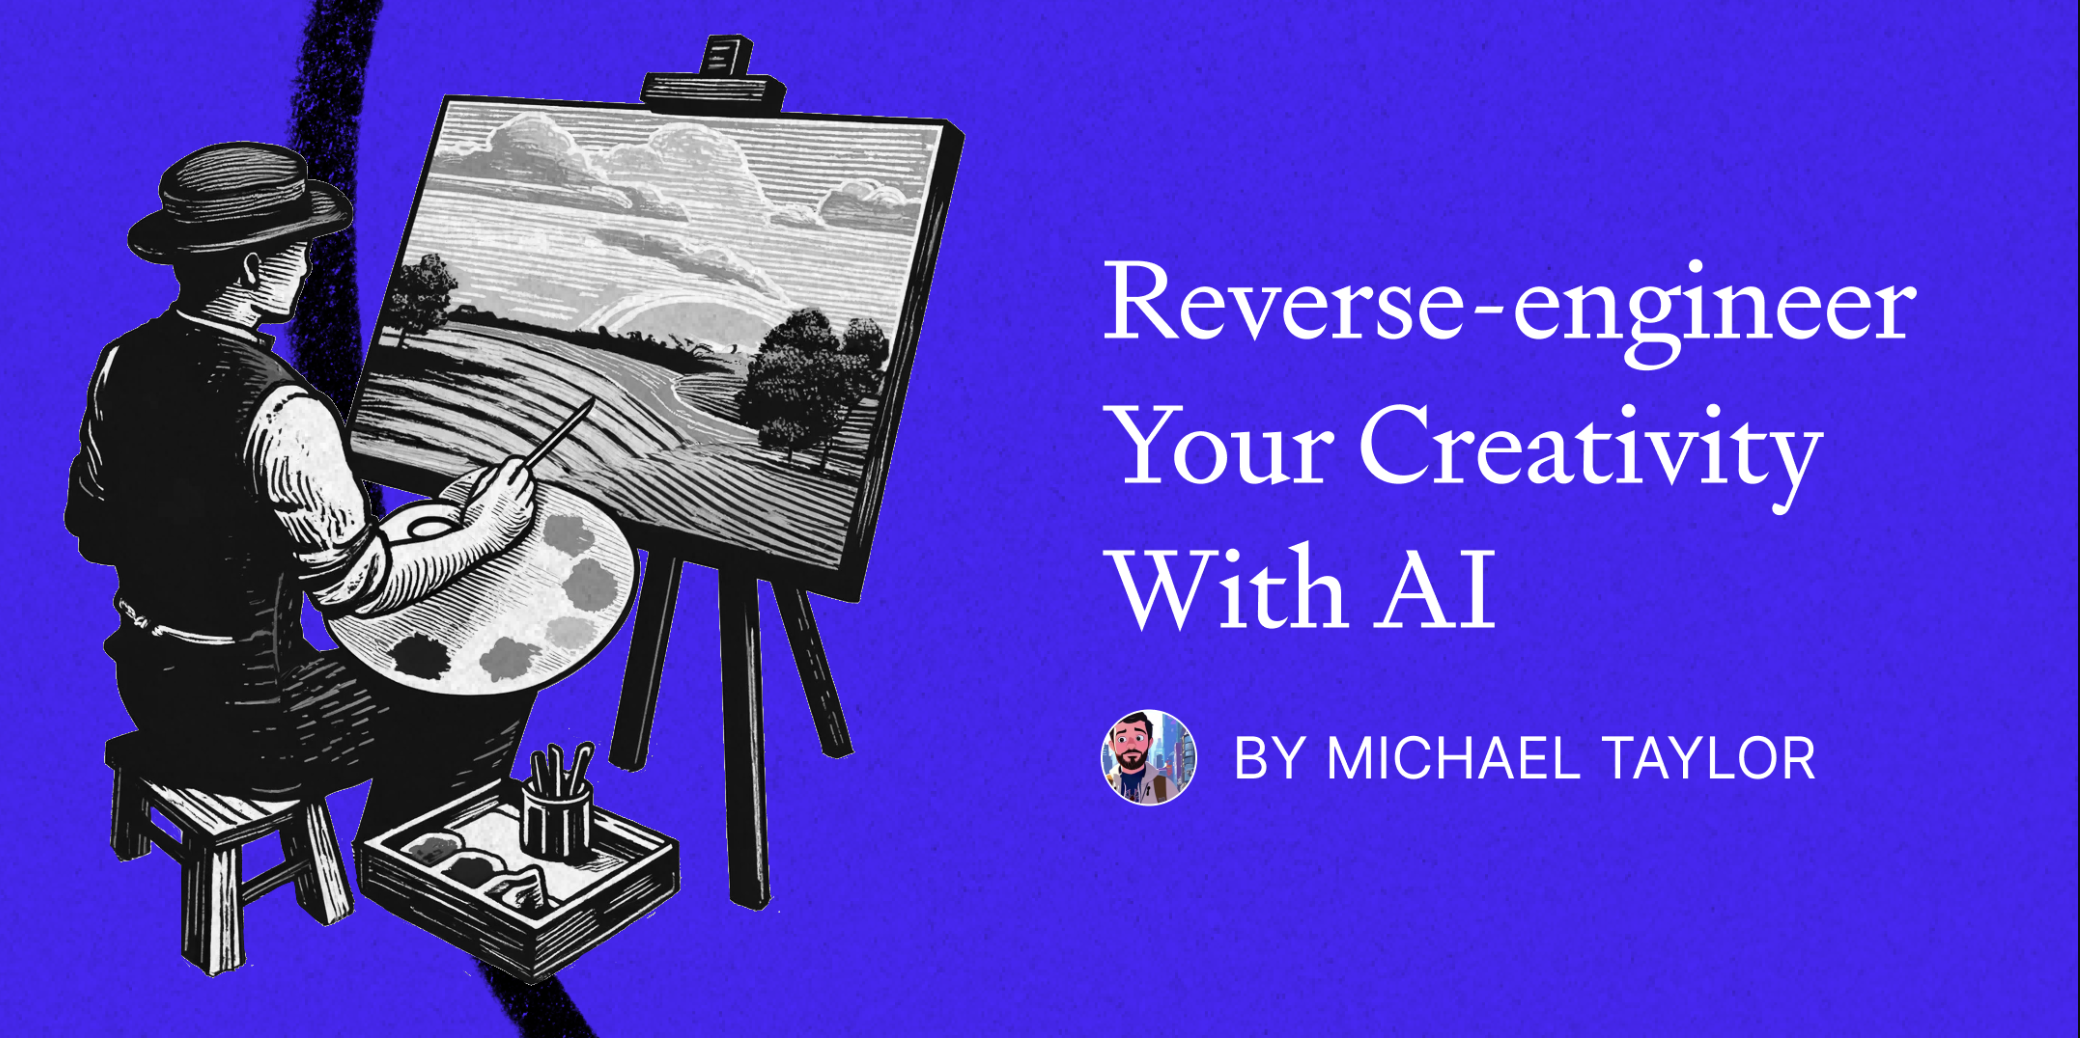 Reverse-engineer Your Creativity With AI